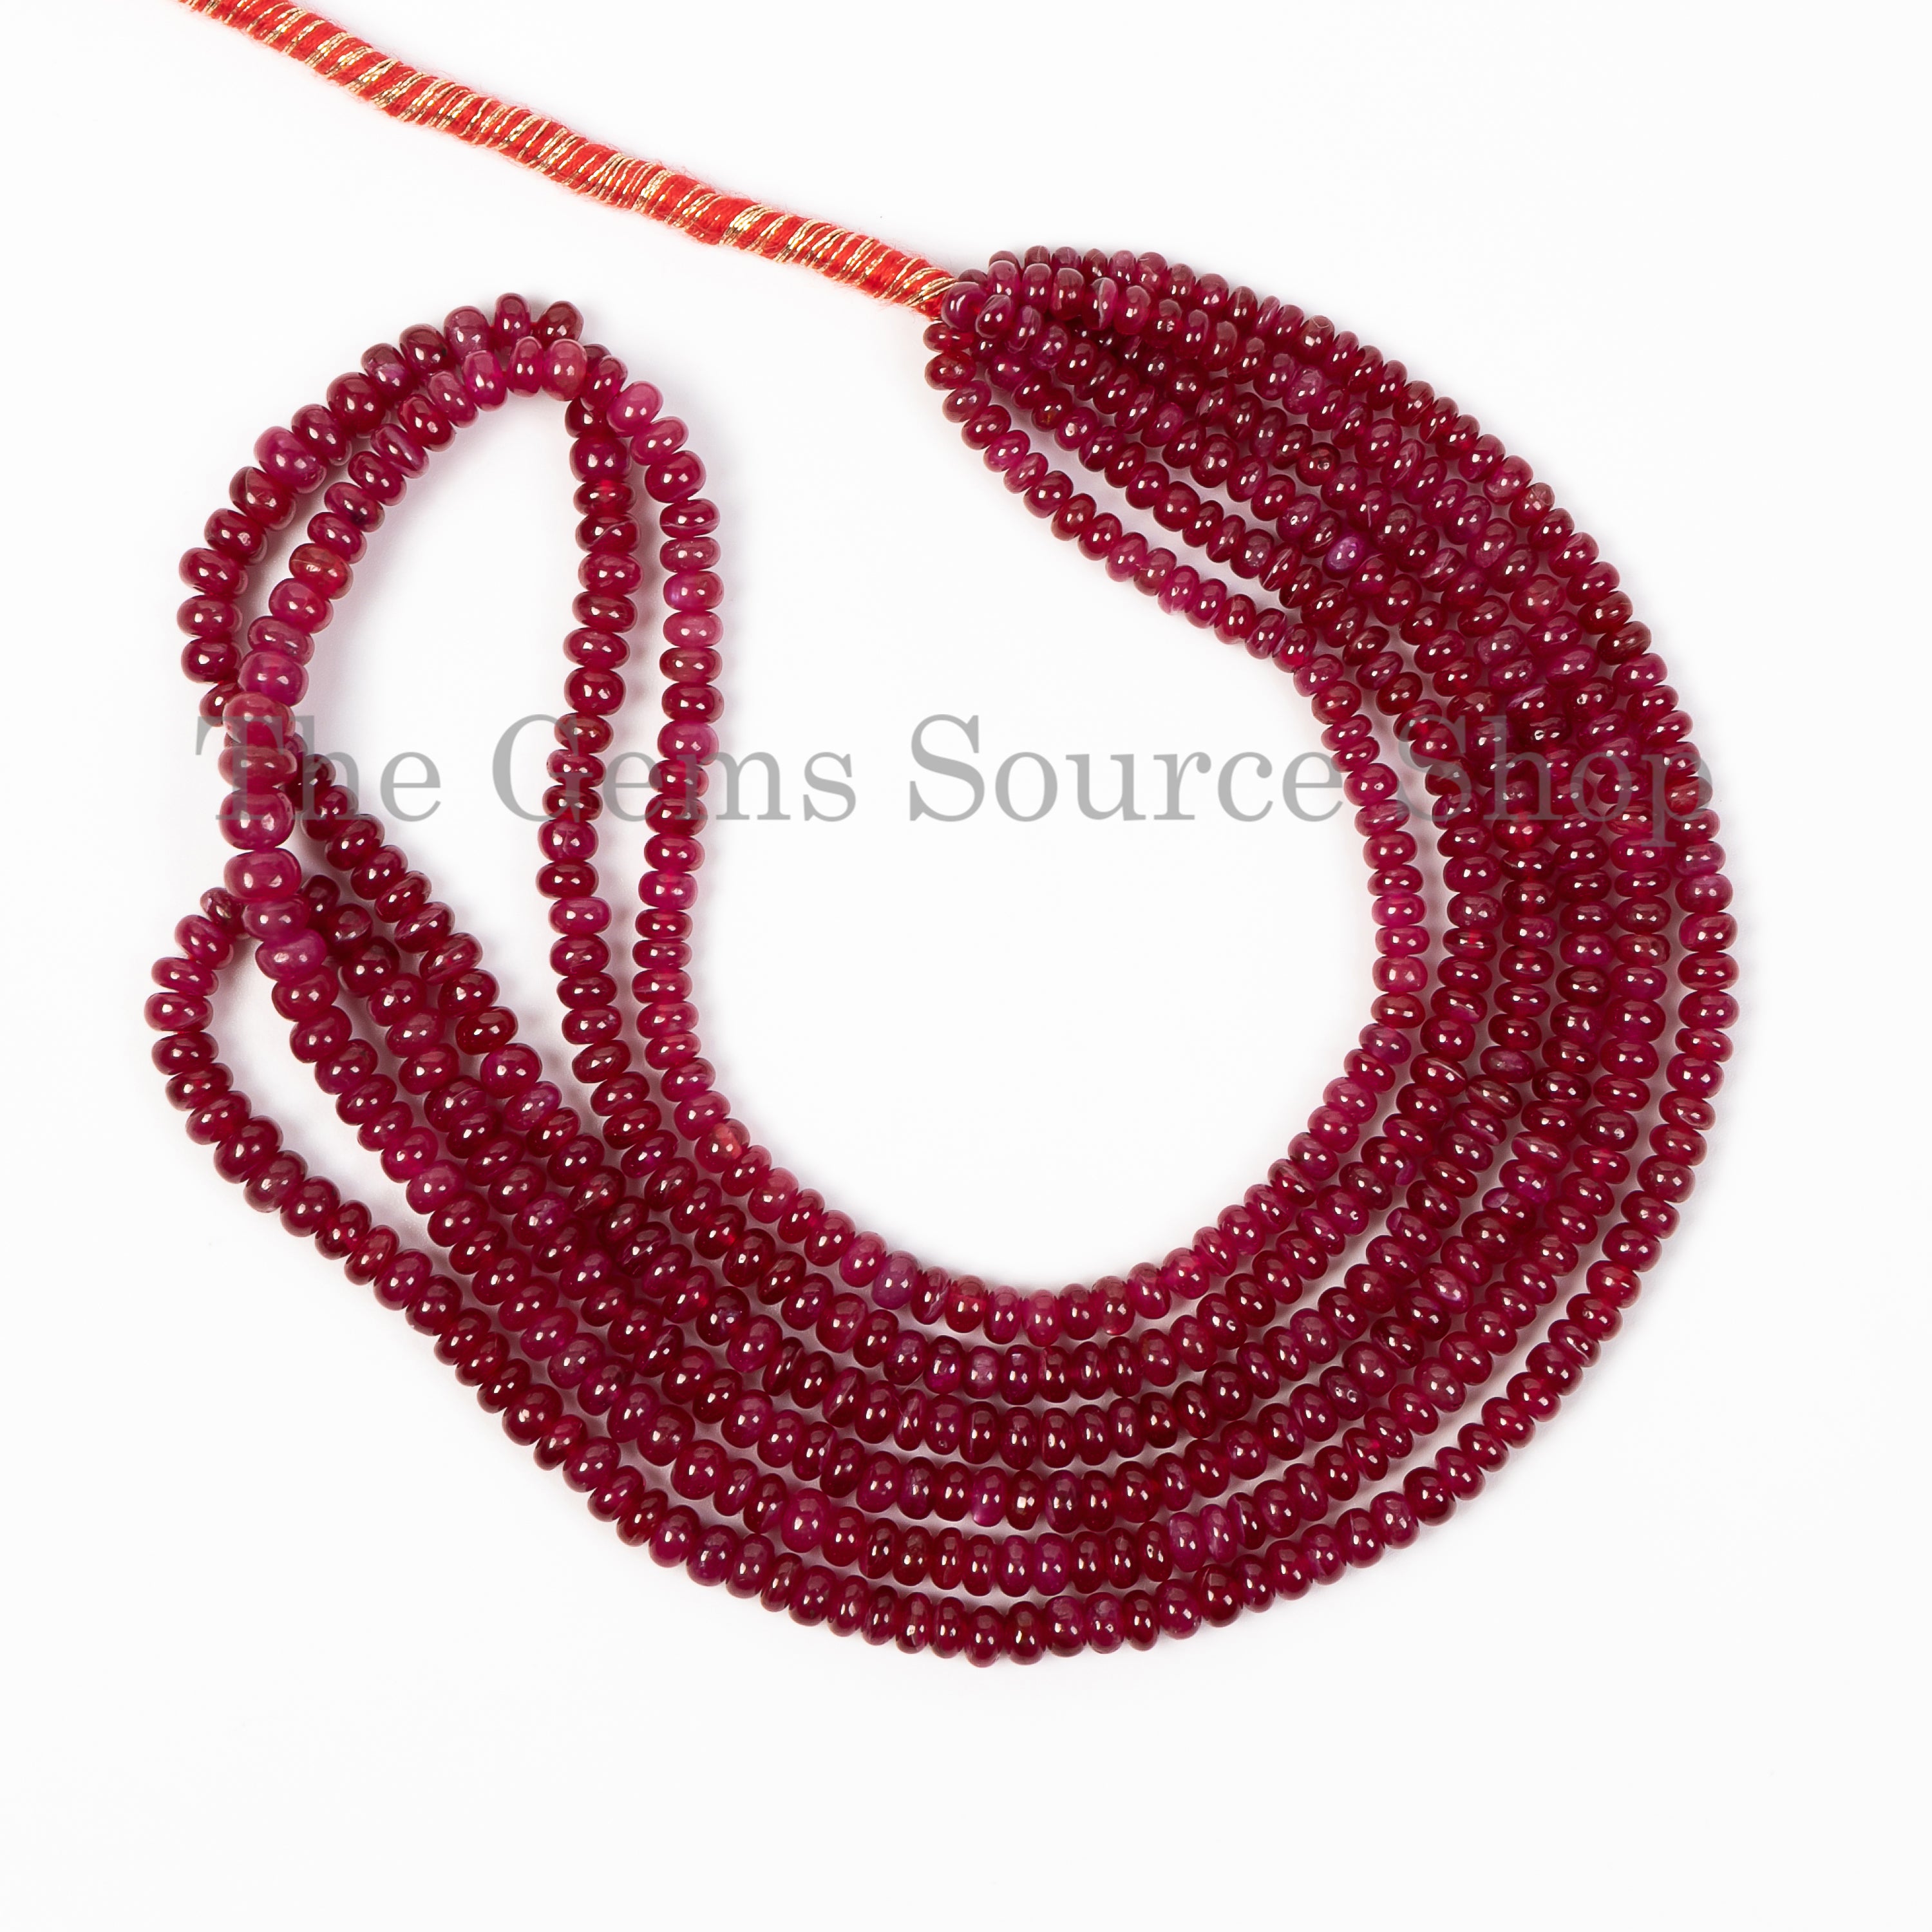 New Arrivals! Natural Ruby Smooth Rondelle Beads, Loose Ruby Strand, Beads For Jewelry TGS-5058